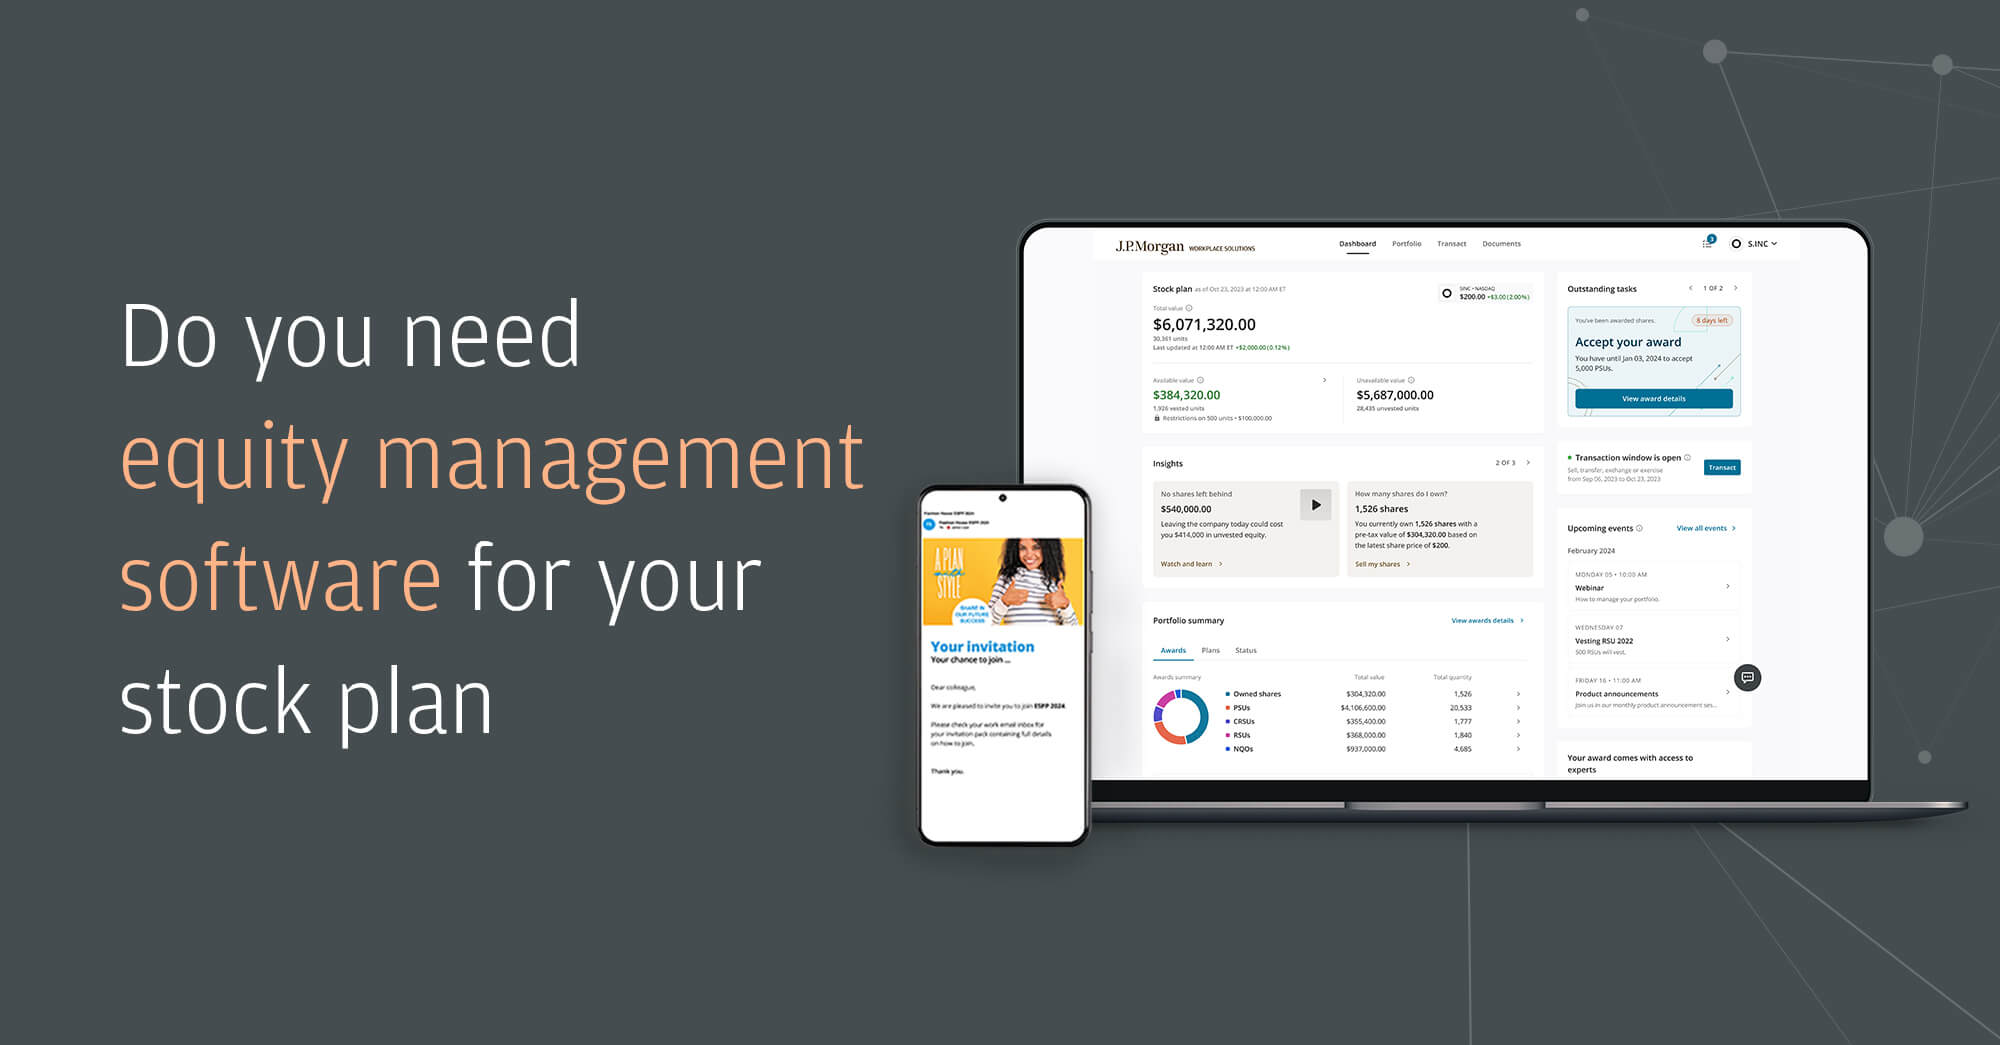 Do you need equity management software for your stock plan?